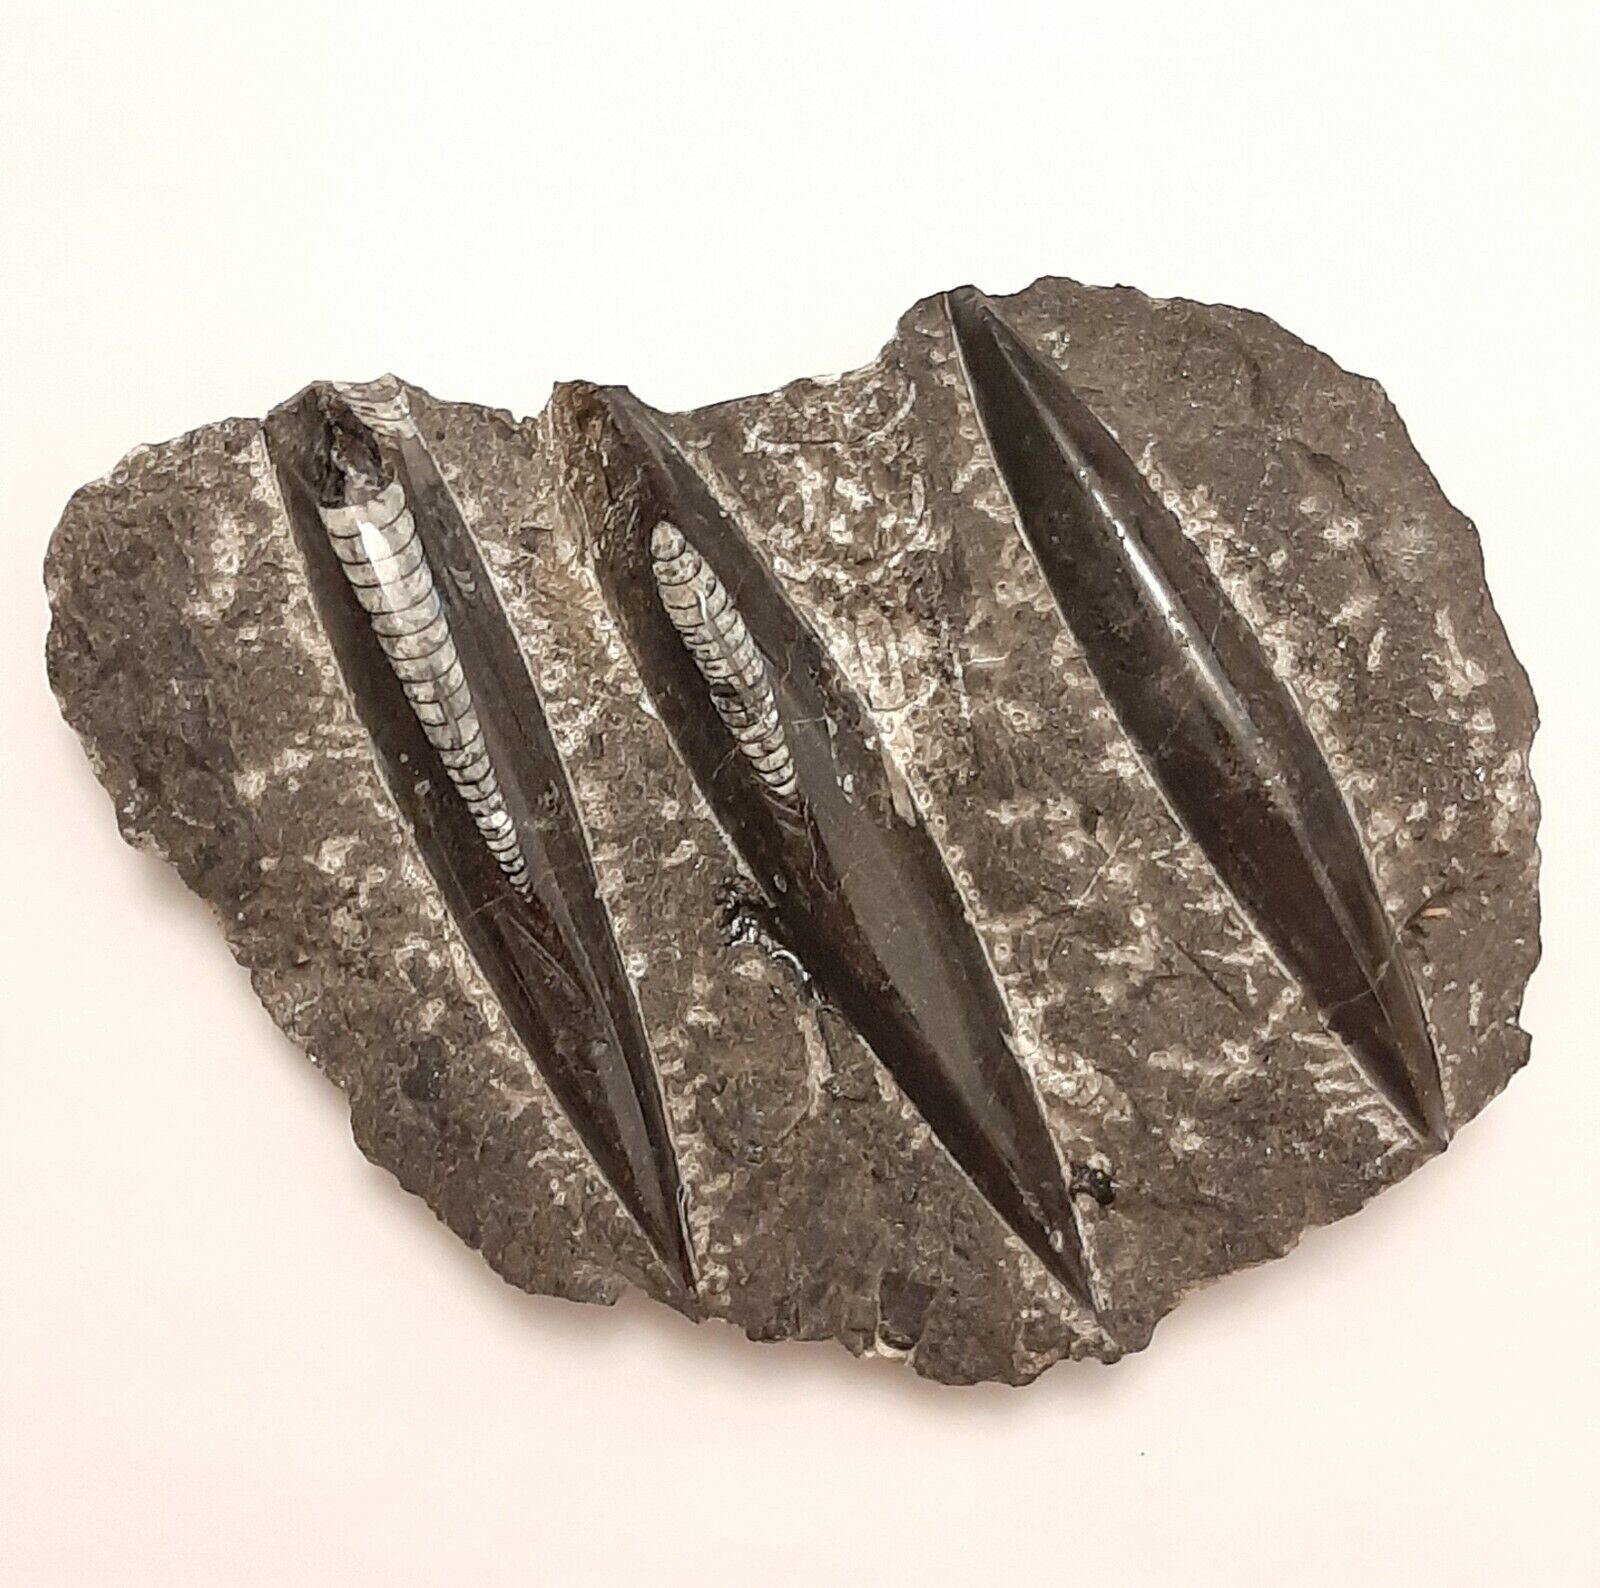 Orthoceras Fossil Stone Plate Black Rock 3 Spears 760g